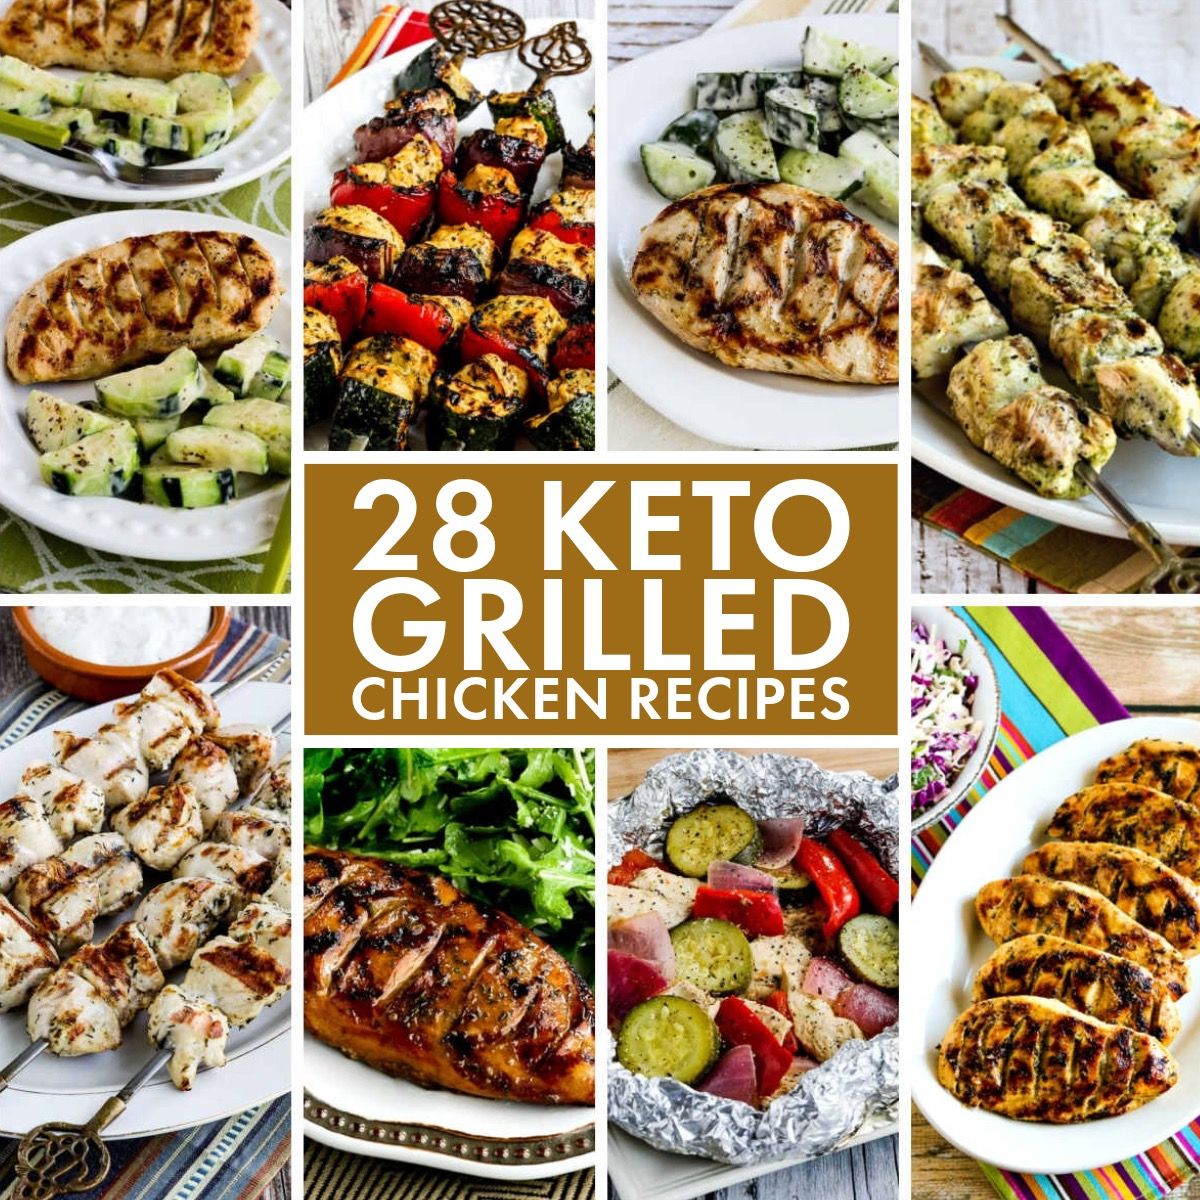 28 Keto Grilled Chicken Recipes test overlay collage showing featured recipes.